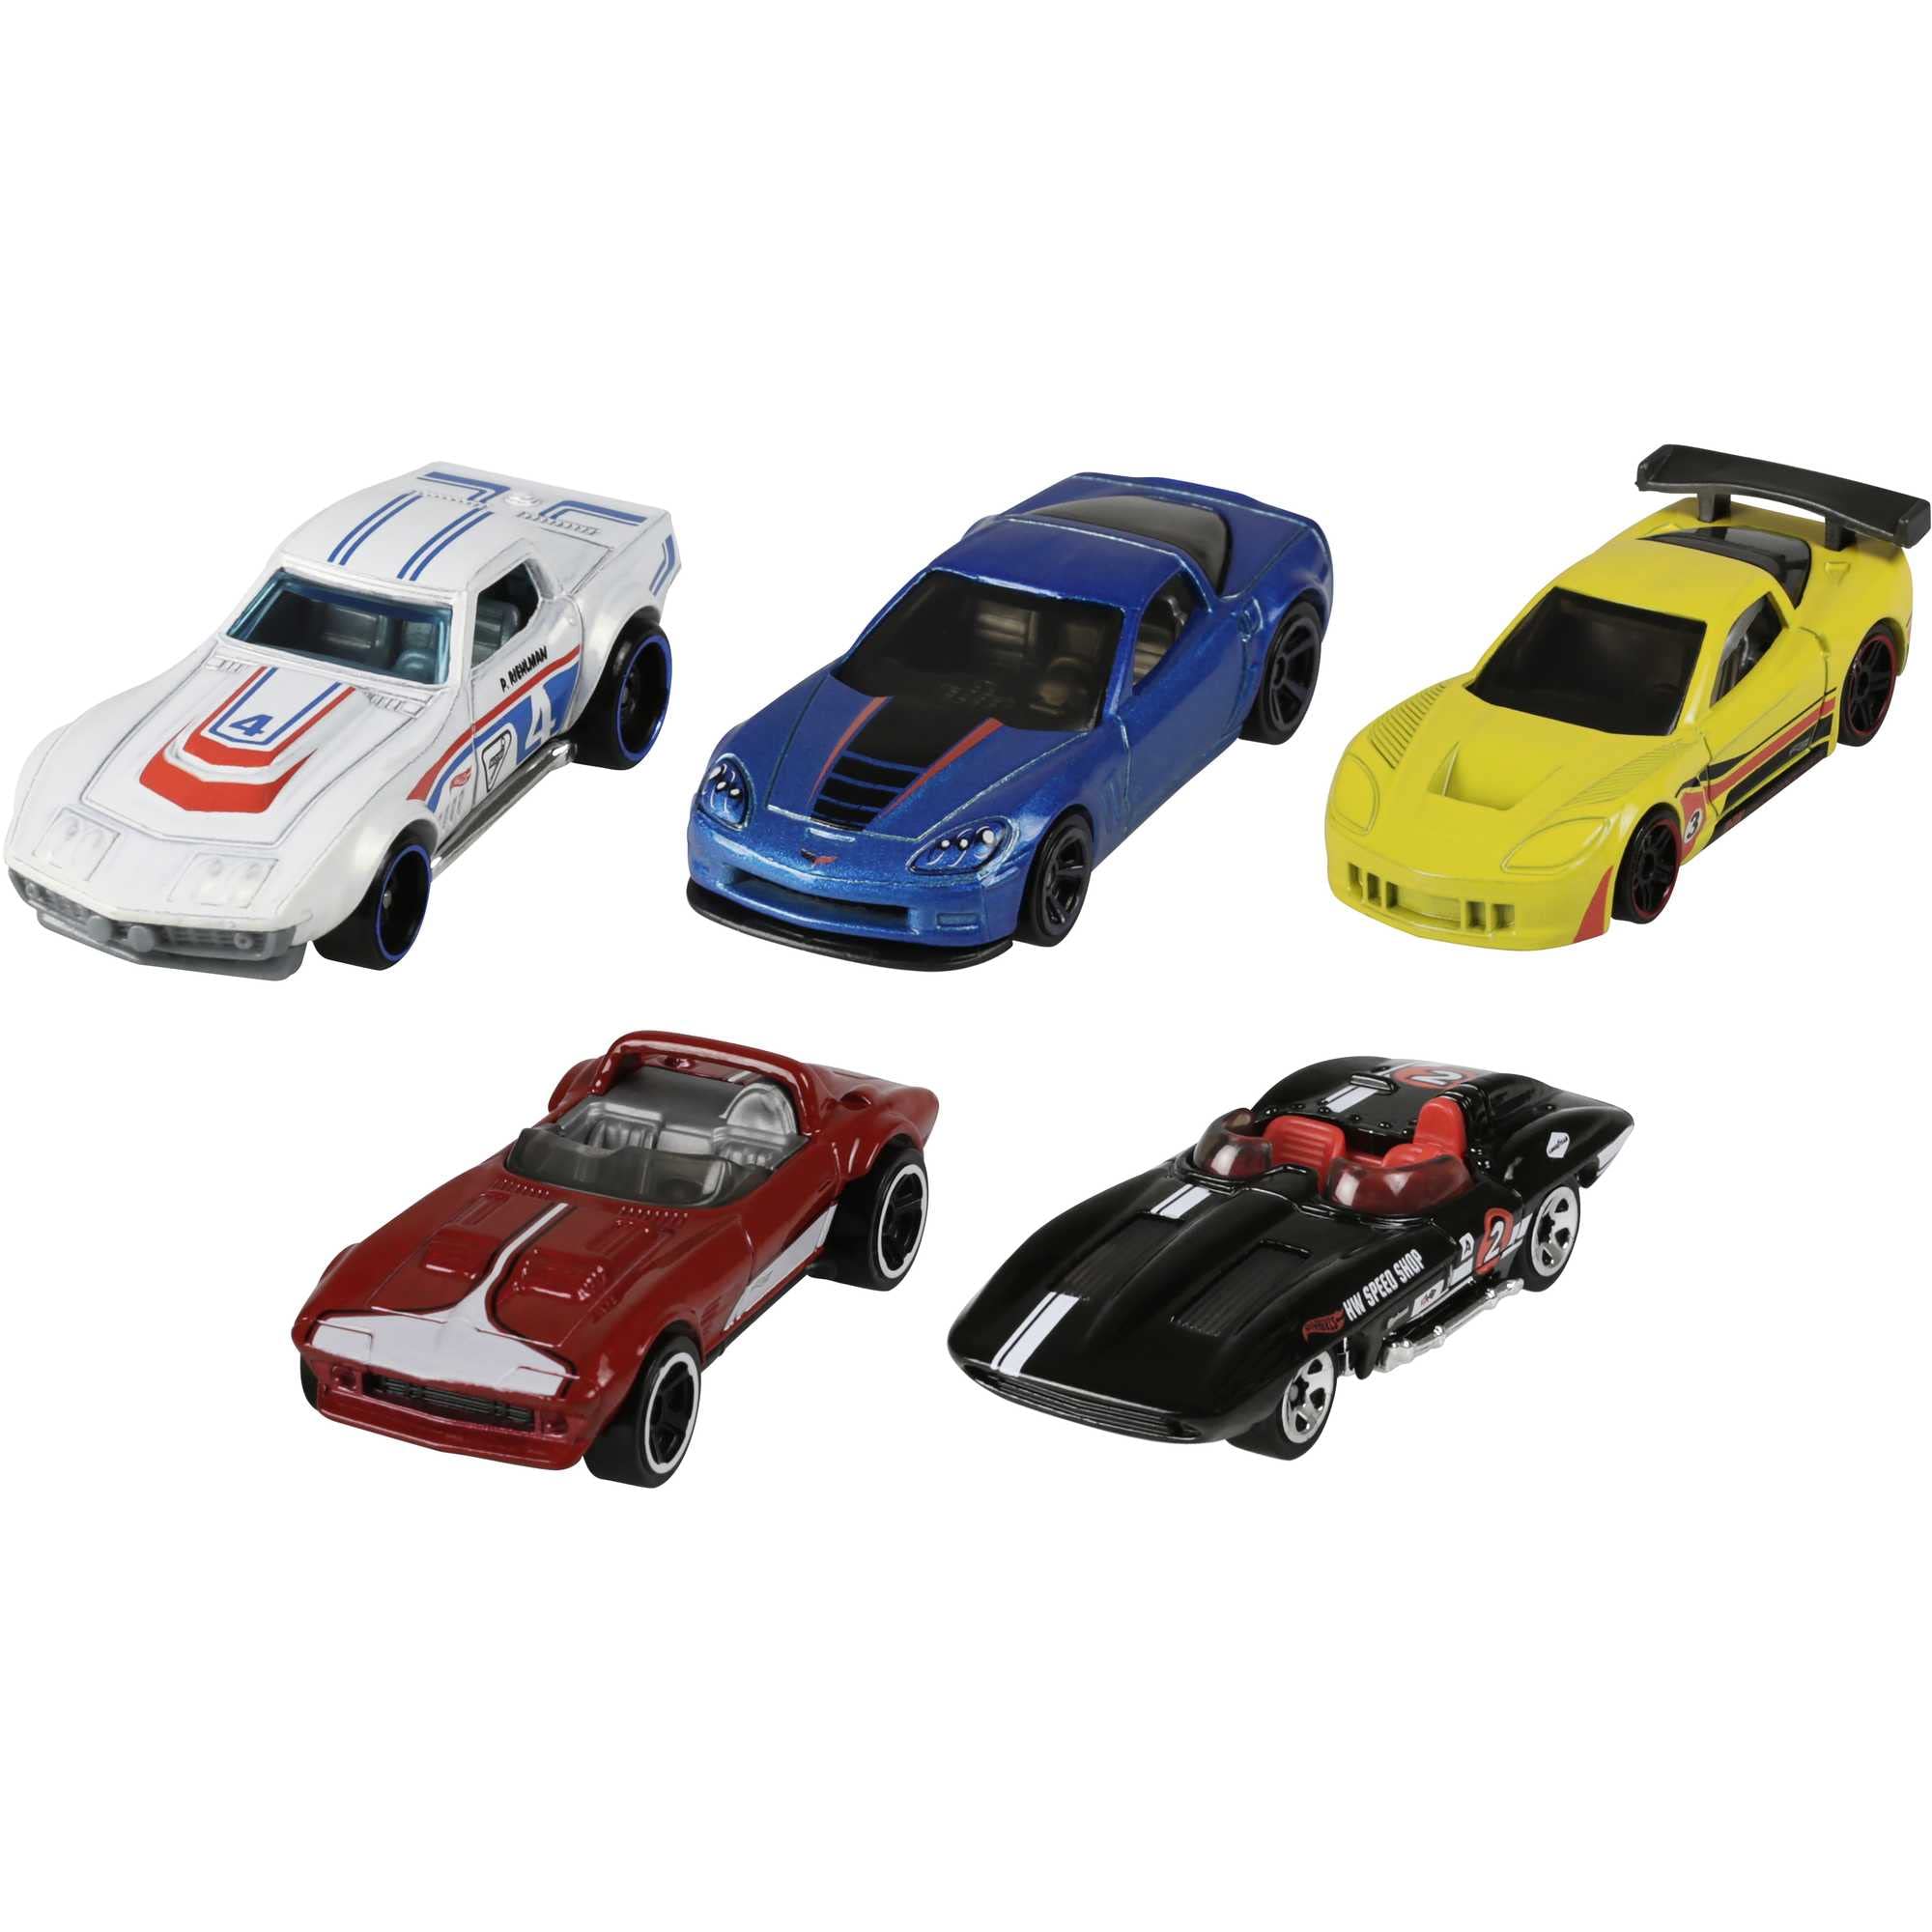 Hot Wheels 5-Car Pack of 1:64 Scale Vehicles, Gift for Collectors & Kids Ages 3 Years Old & Up, 0.086, Colors May Vary.